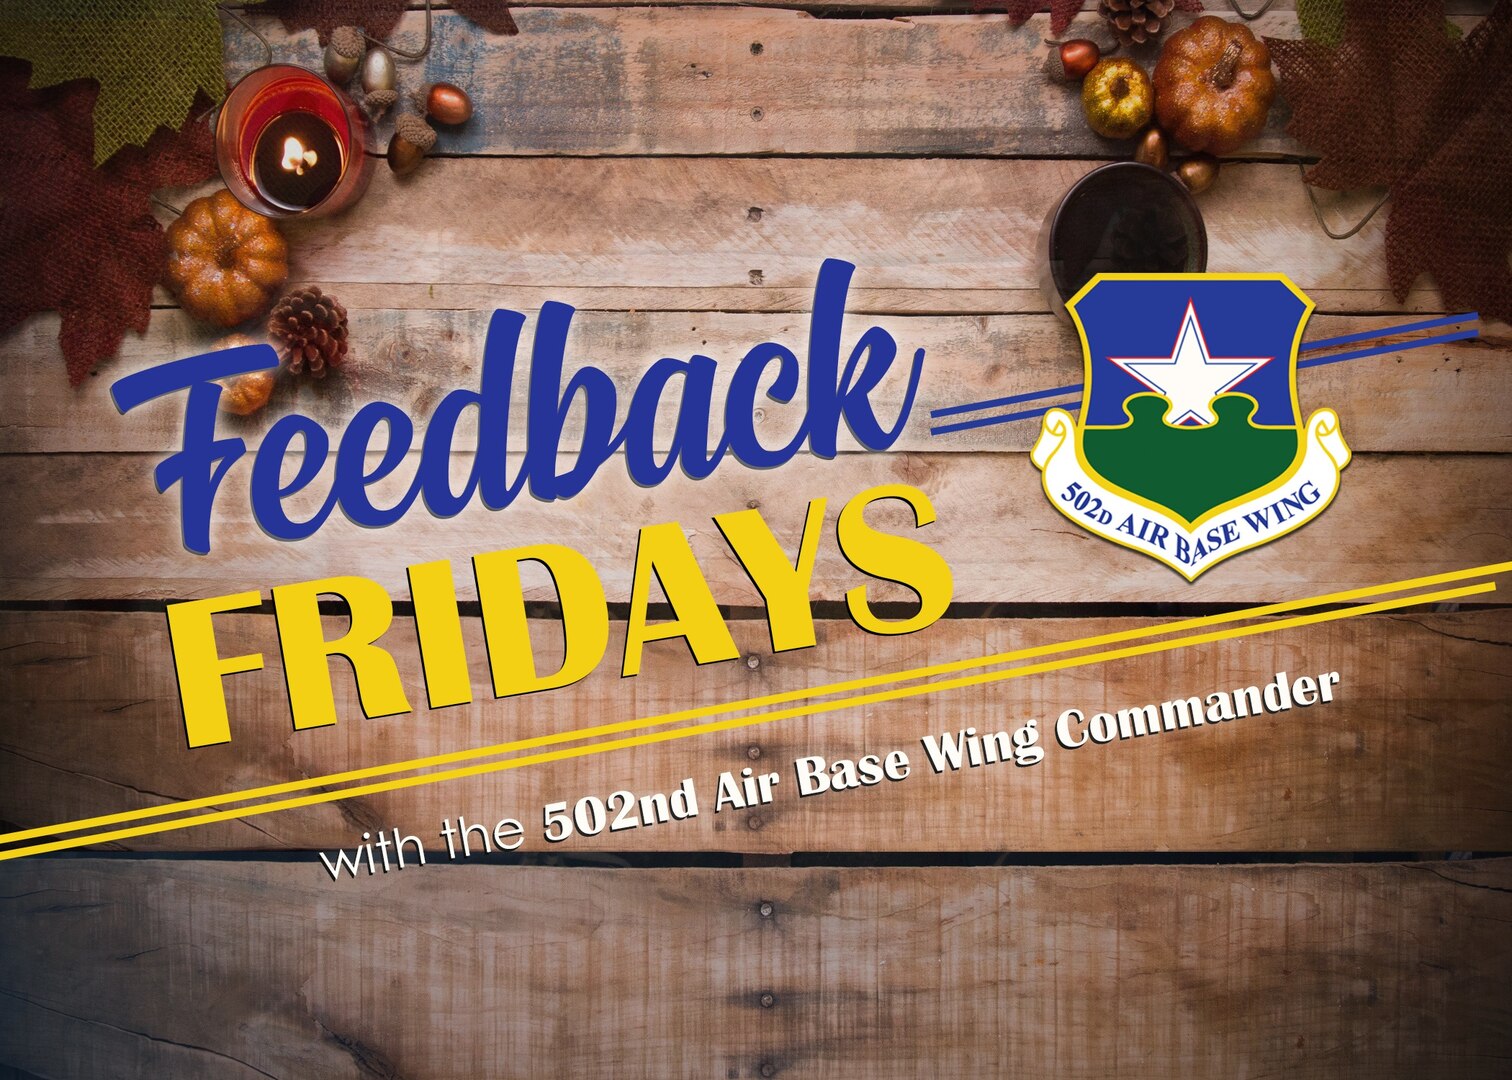 Feedback Fridays is a weekly forum that aims to connect the 502d Air Base Wing with members of the Joint Base San Antonio community. Questions are collected during commander’s calls, town hall meetings and throughout the week.

If you have a question or concern, please send an email to RandolphPublicAffairs@us.af.mil using the subject line “Feedback Fridays.” Questions will be further researched and published as information becomes available.